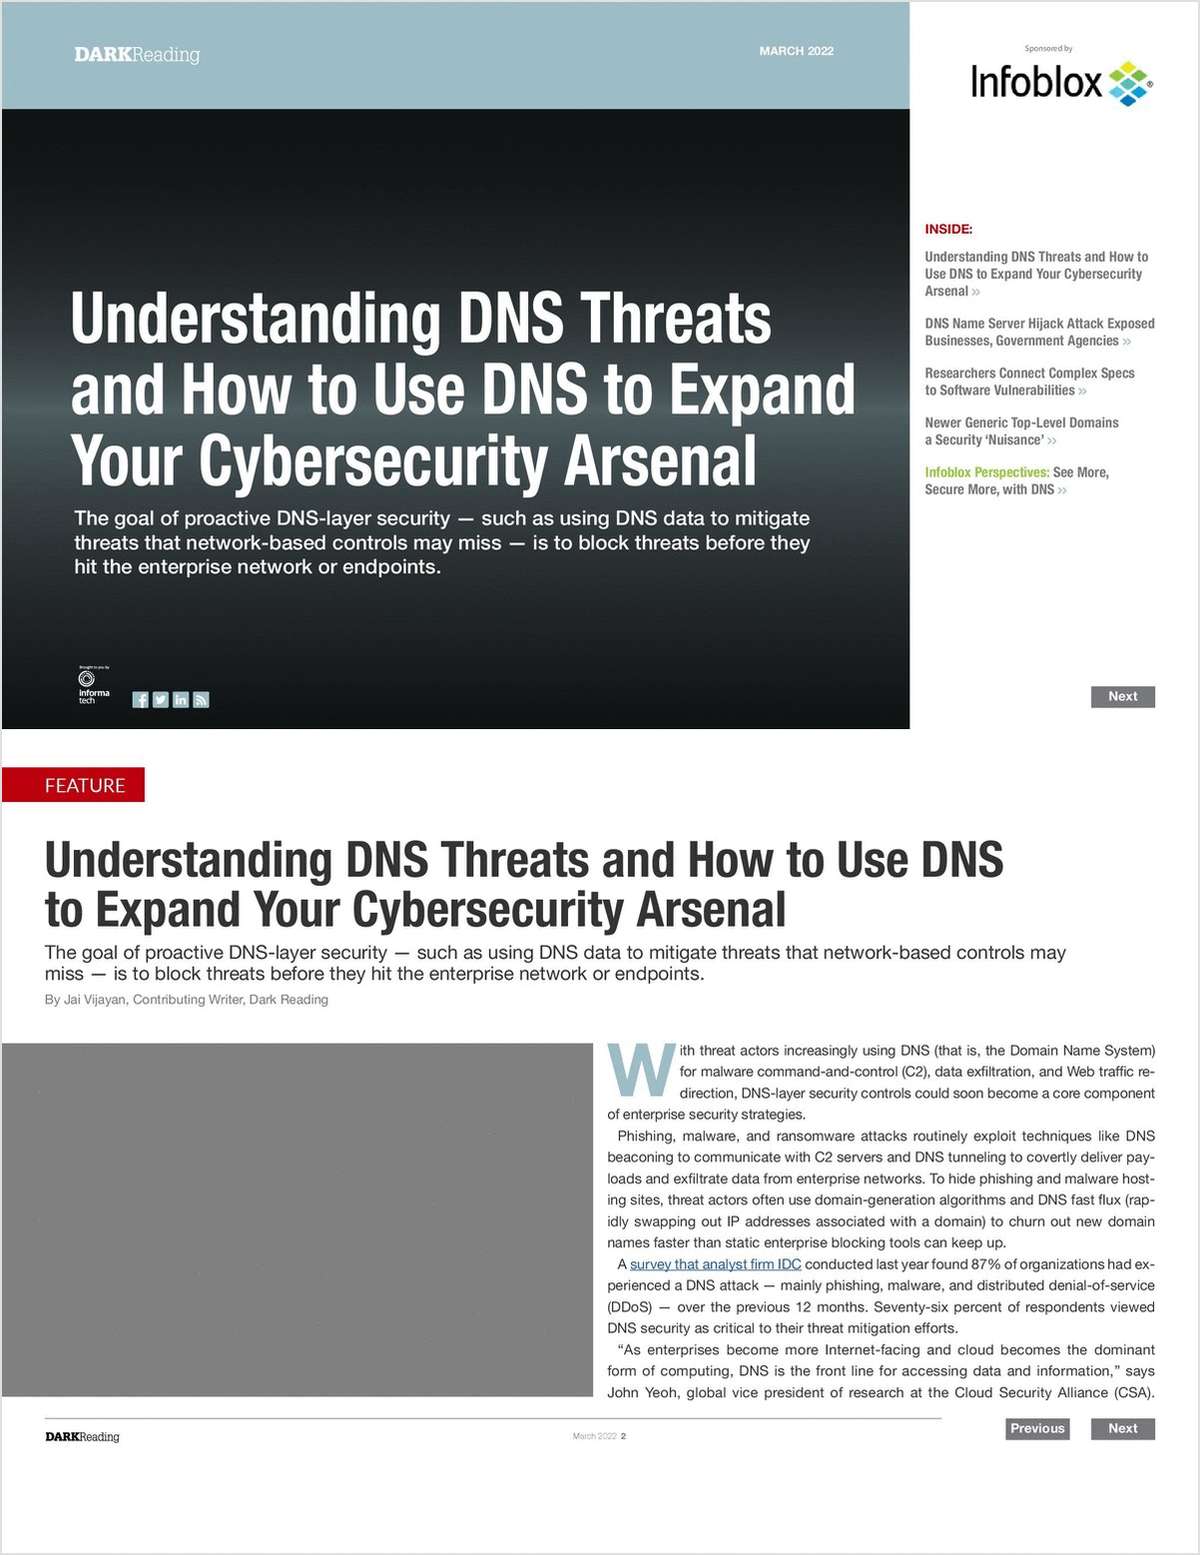 Understanding DNS Threats and How to Use DNS to Expand Your Cybersecurity Arsenal